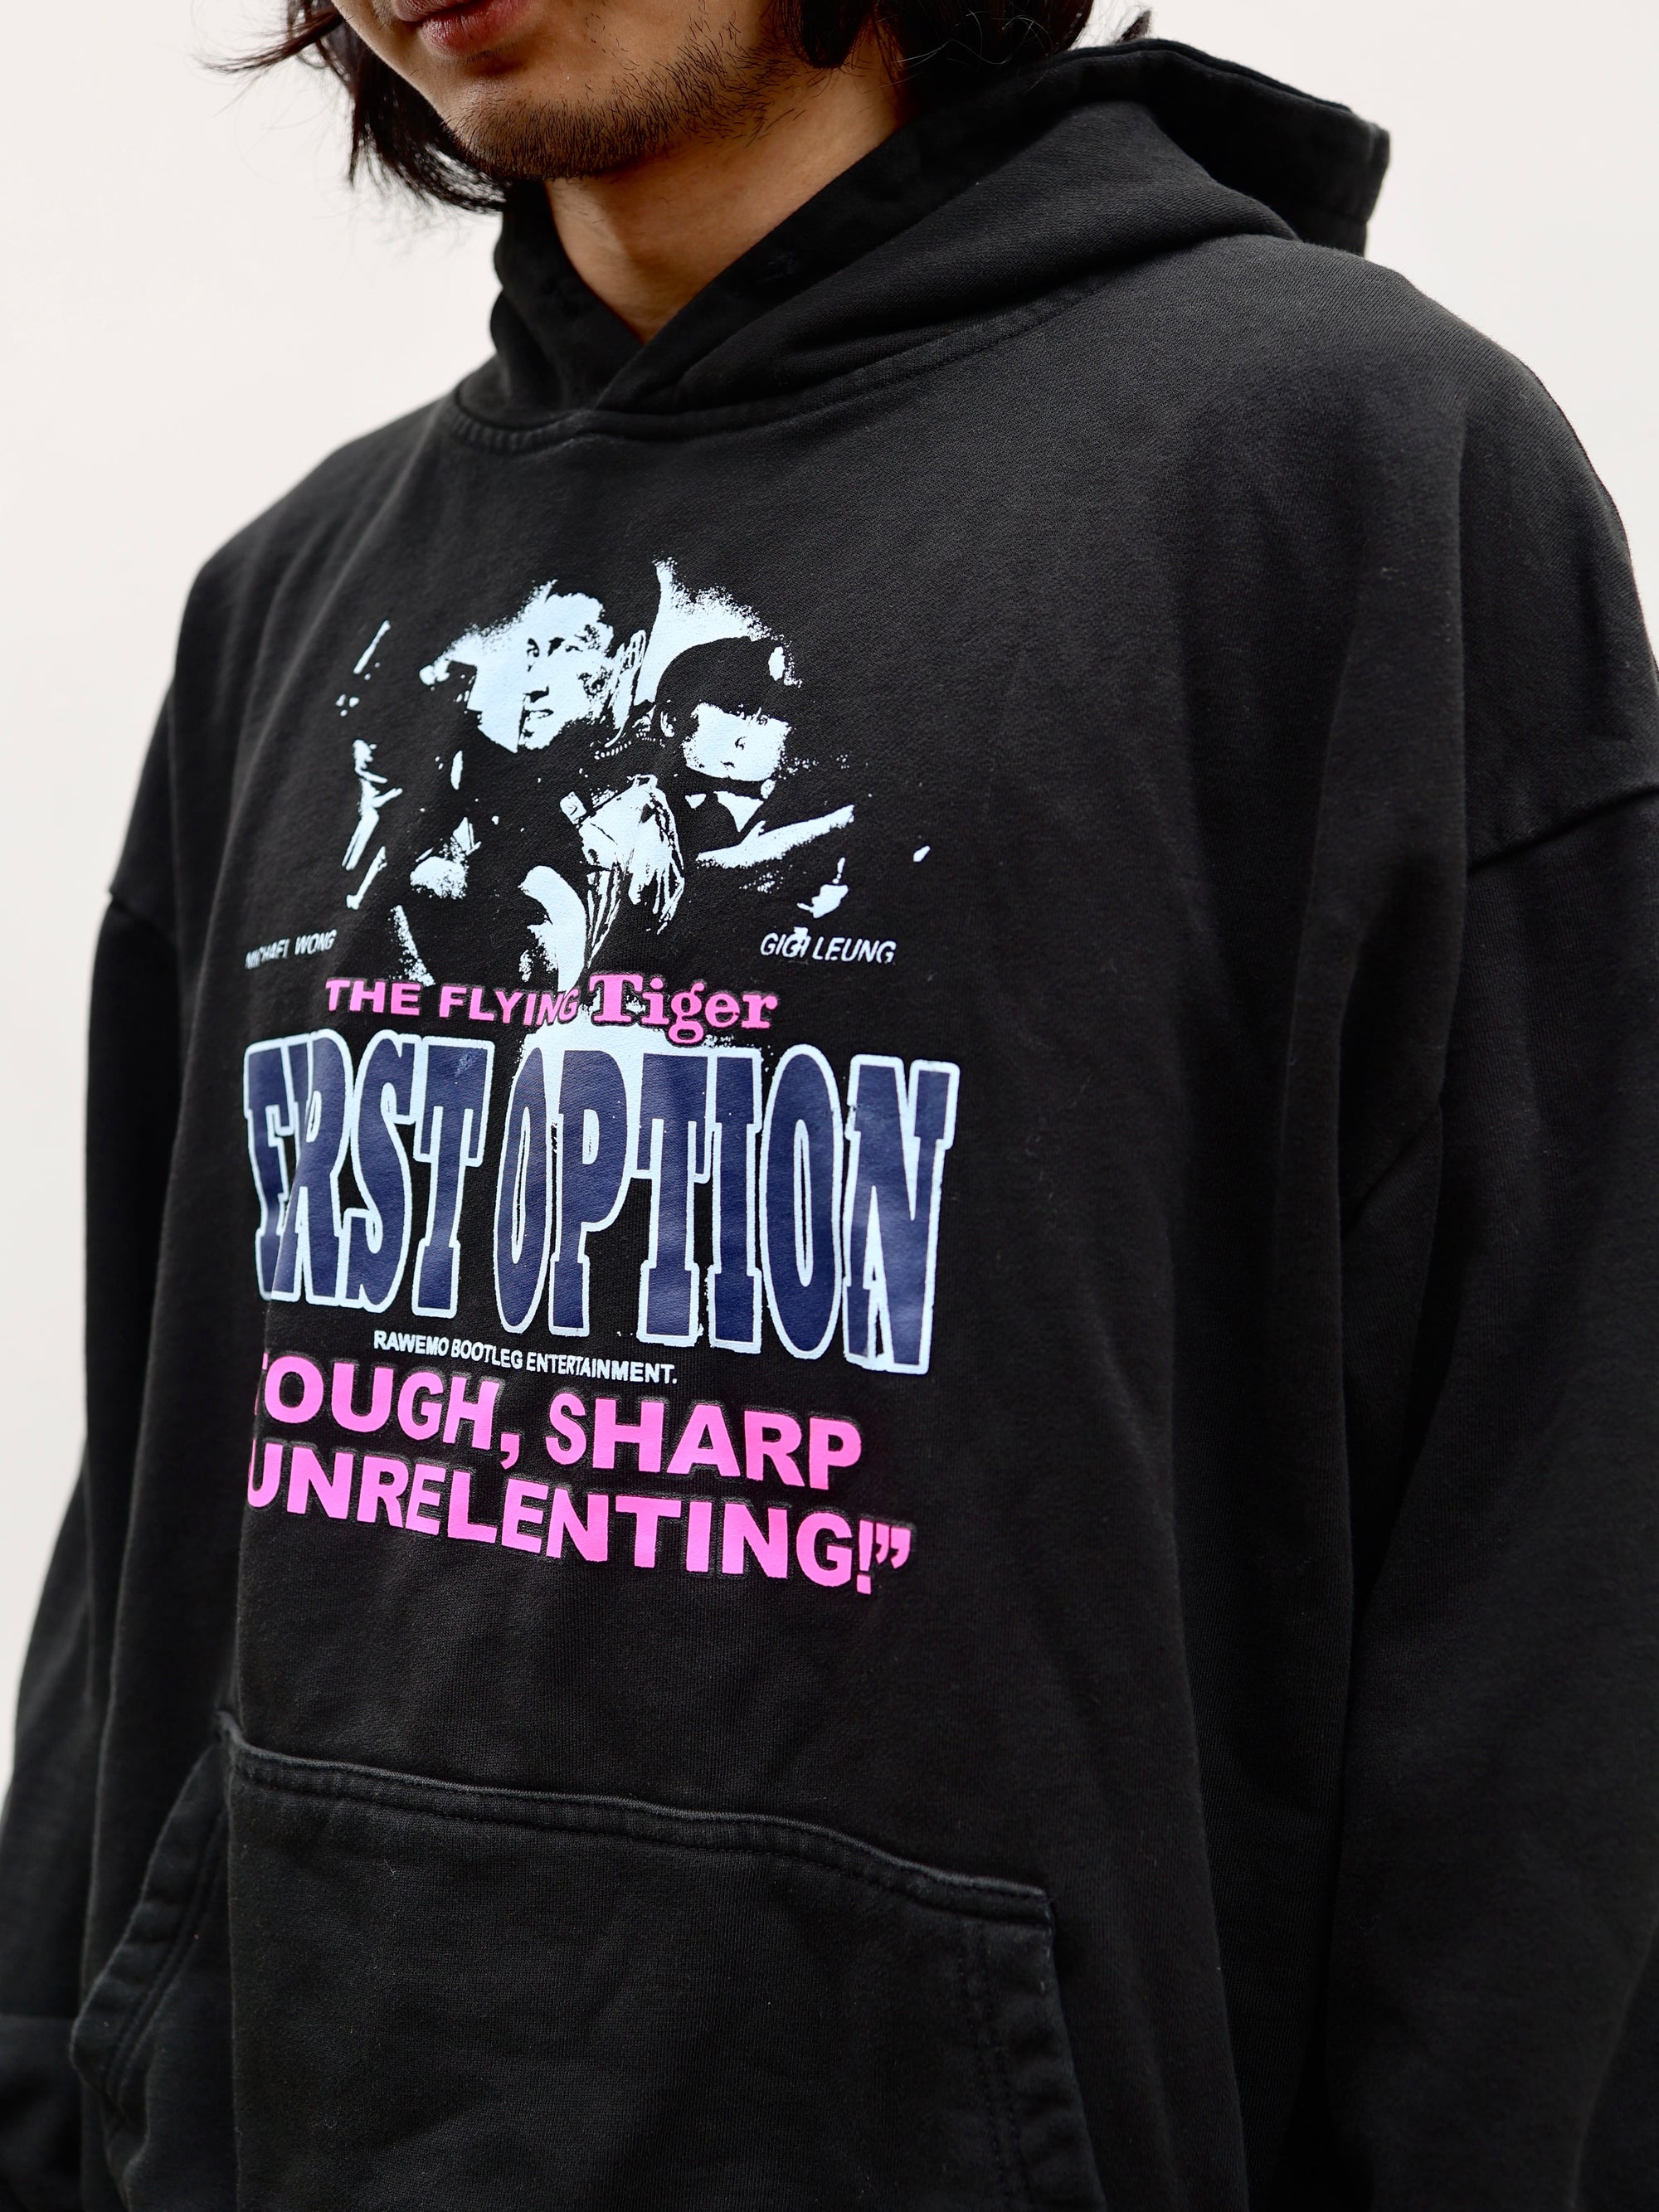 *EXCLUSIVE* First Option Hoodie